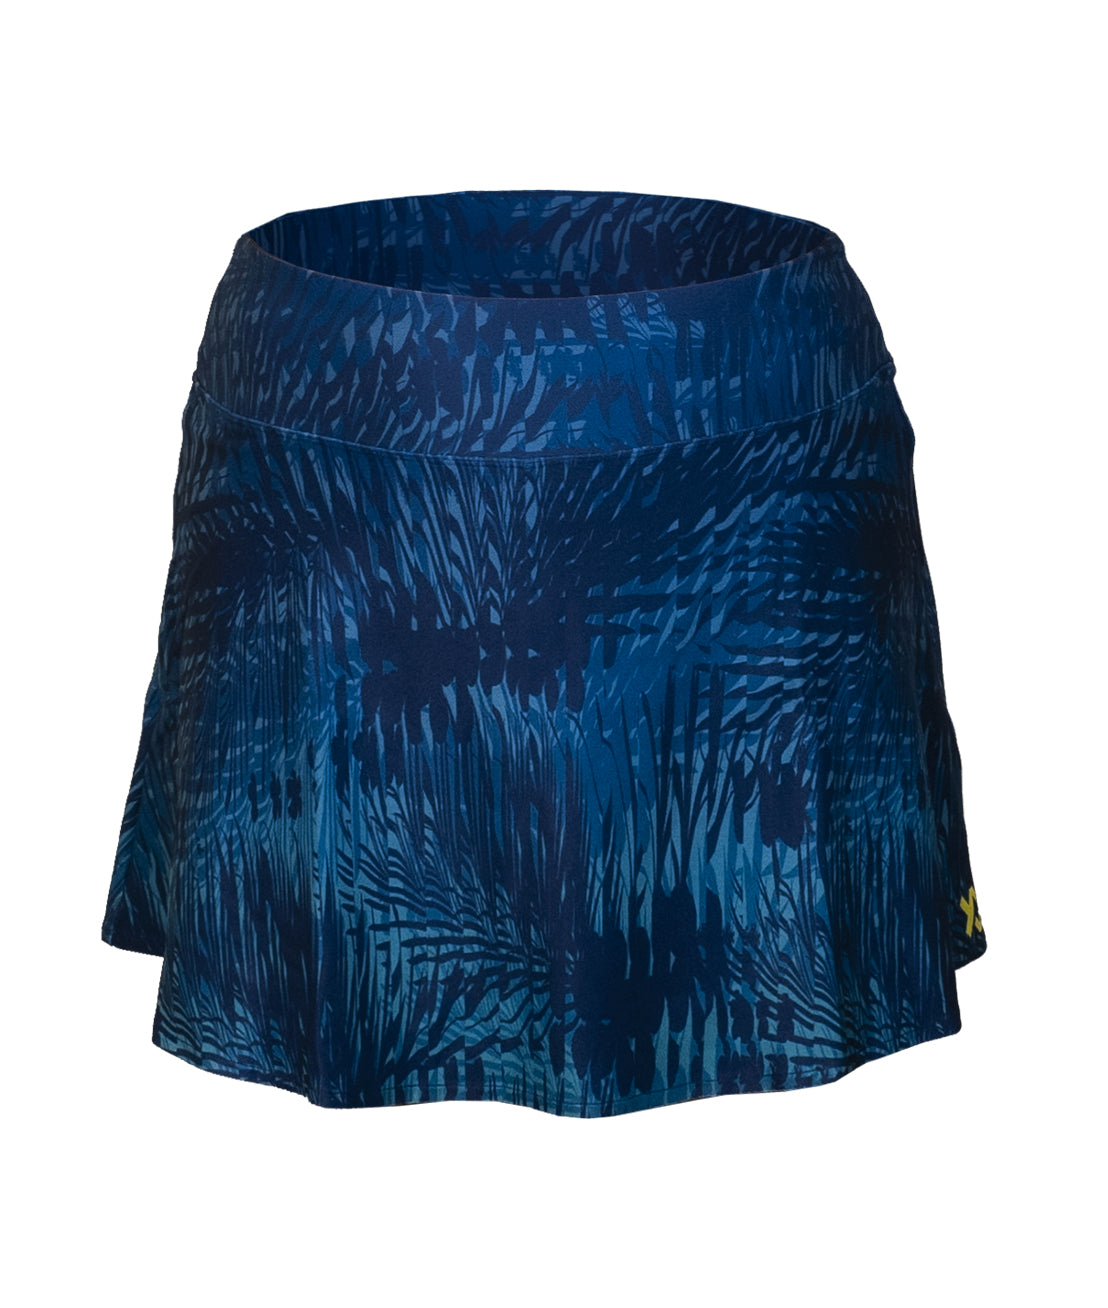 Women's Final Serve Skort (Only available in the USA)